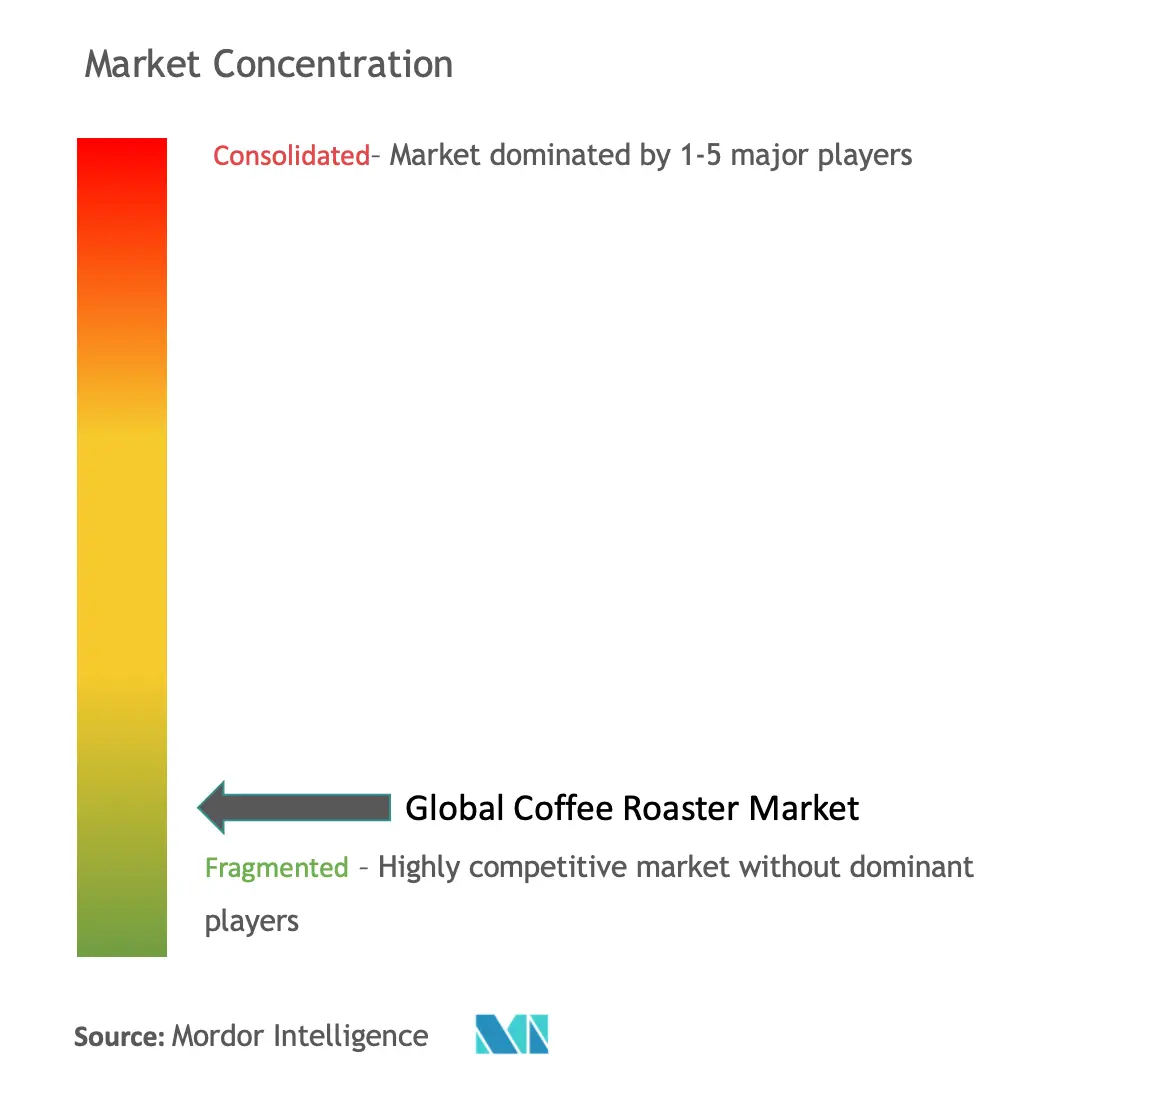 Coffee Roaster Market Concentration